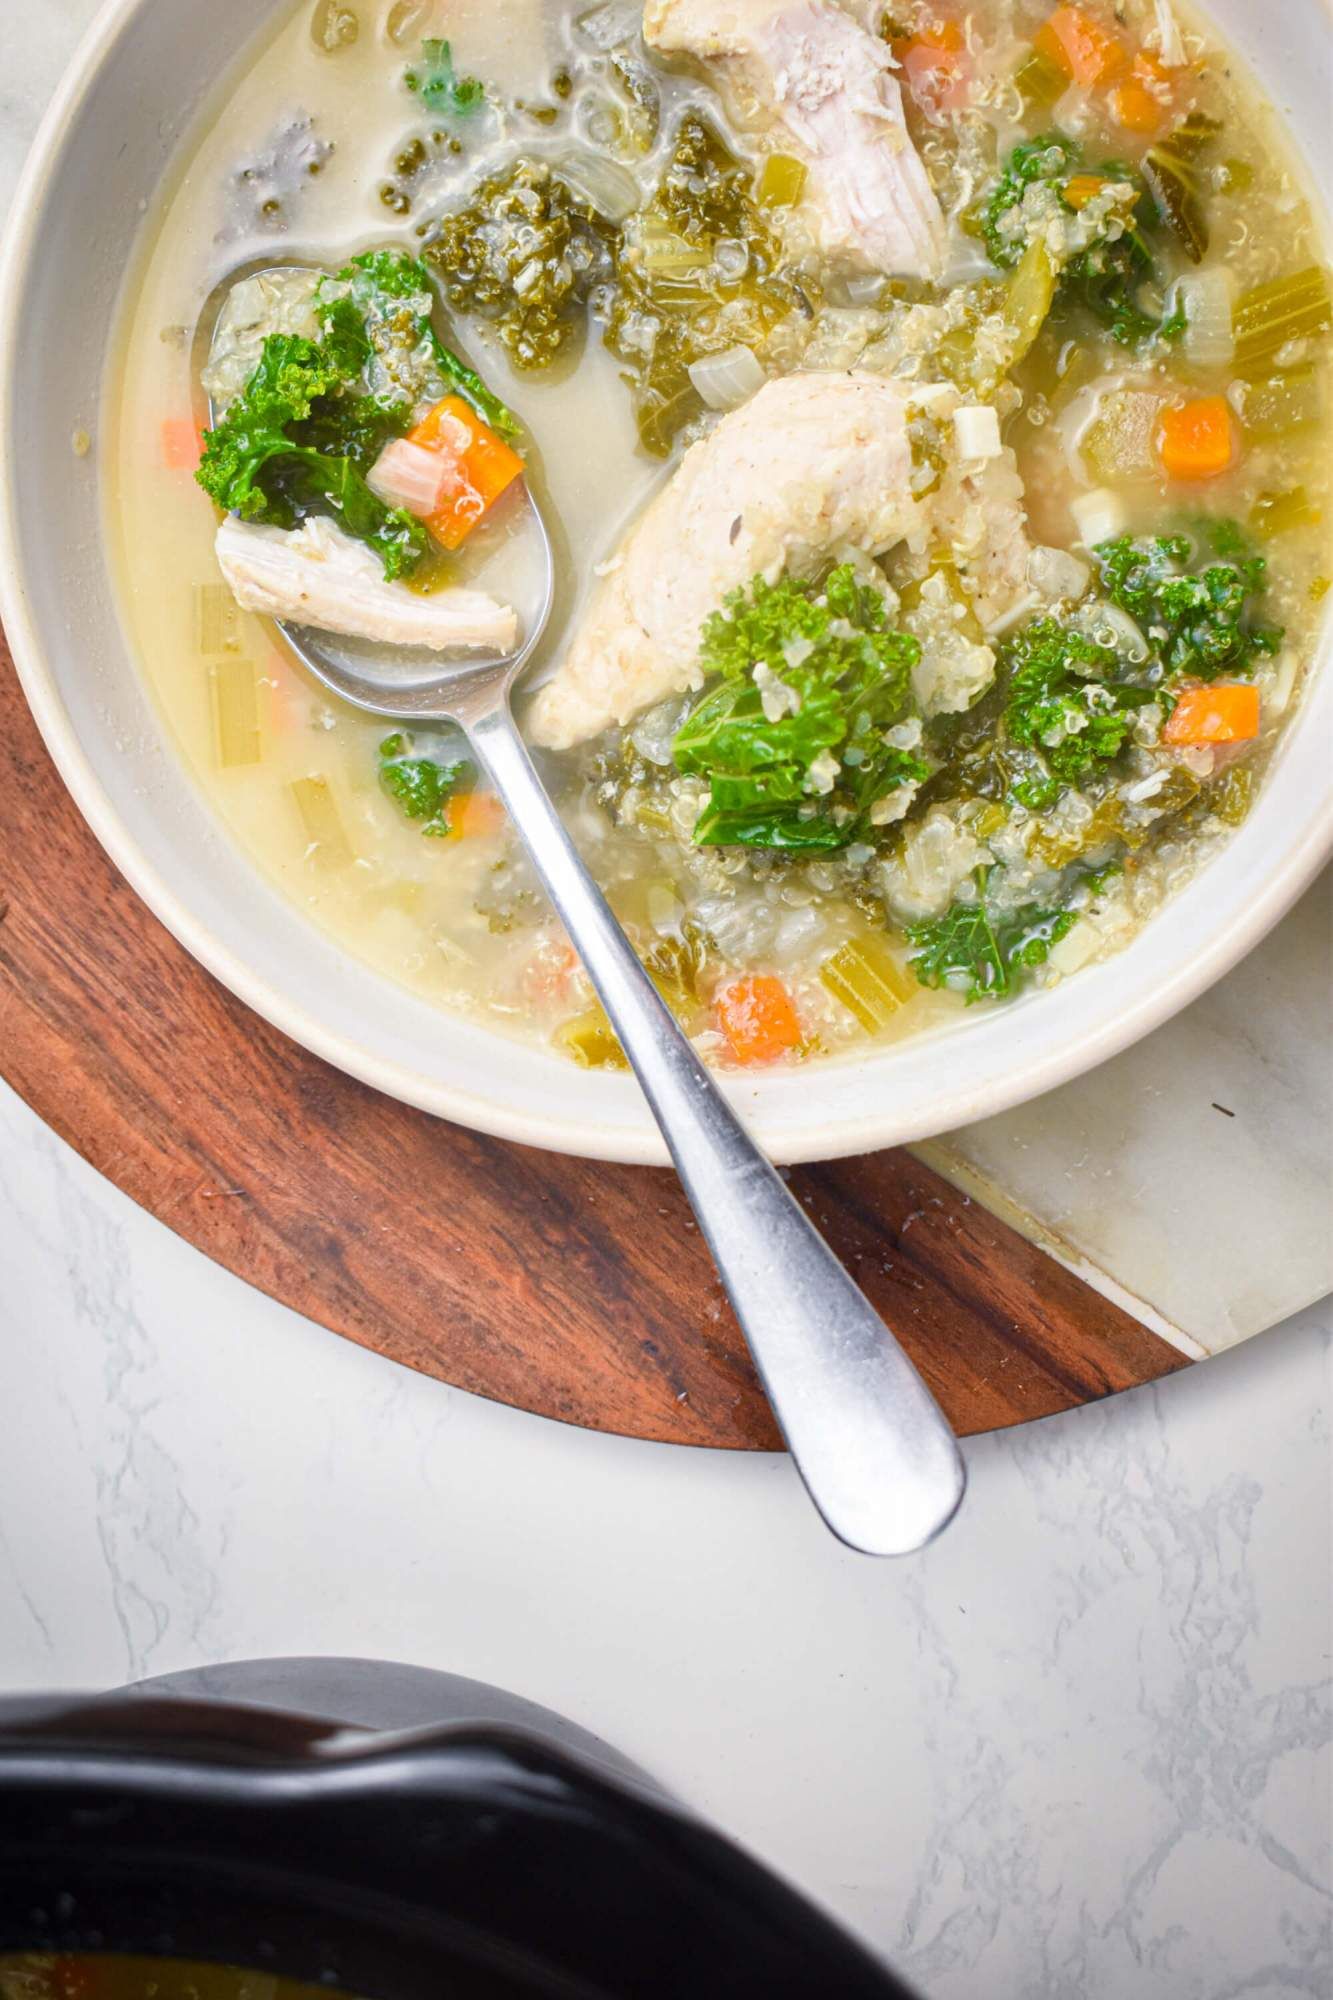 Chicken quinoa soup in a bowl with curly kale, chicken, vegetables, and broth in a bowl with a spoon.